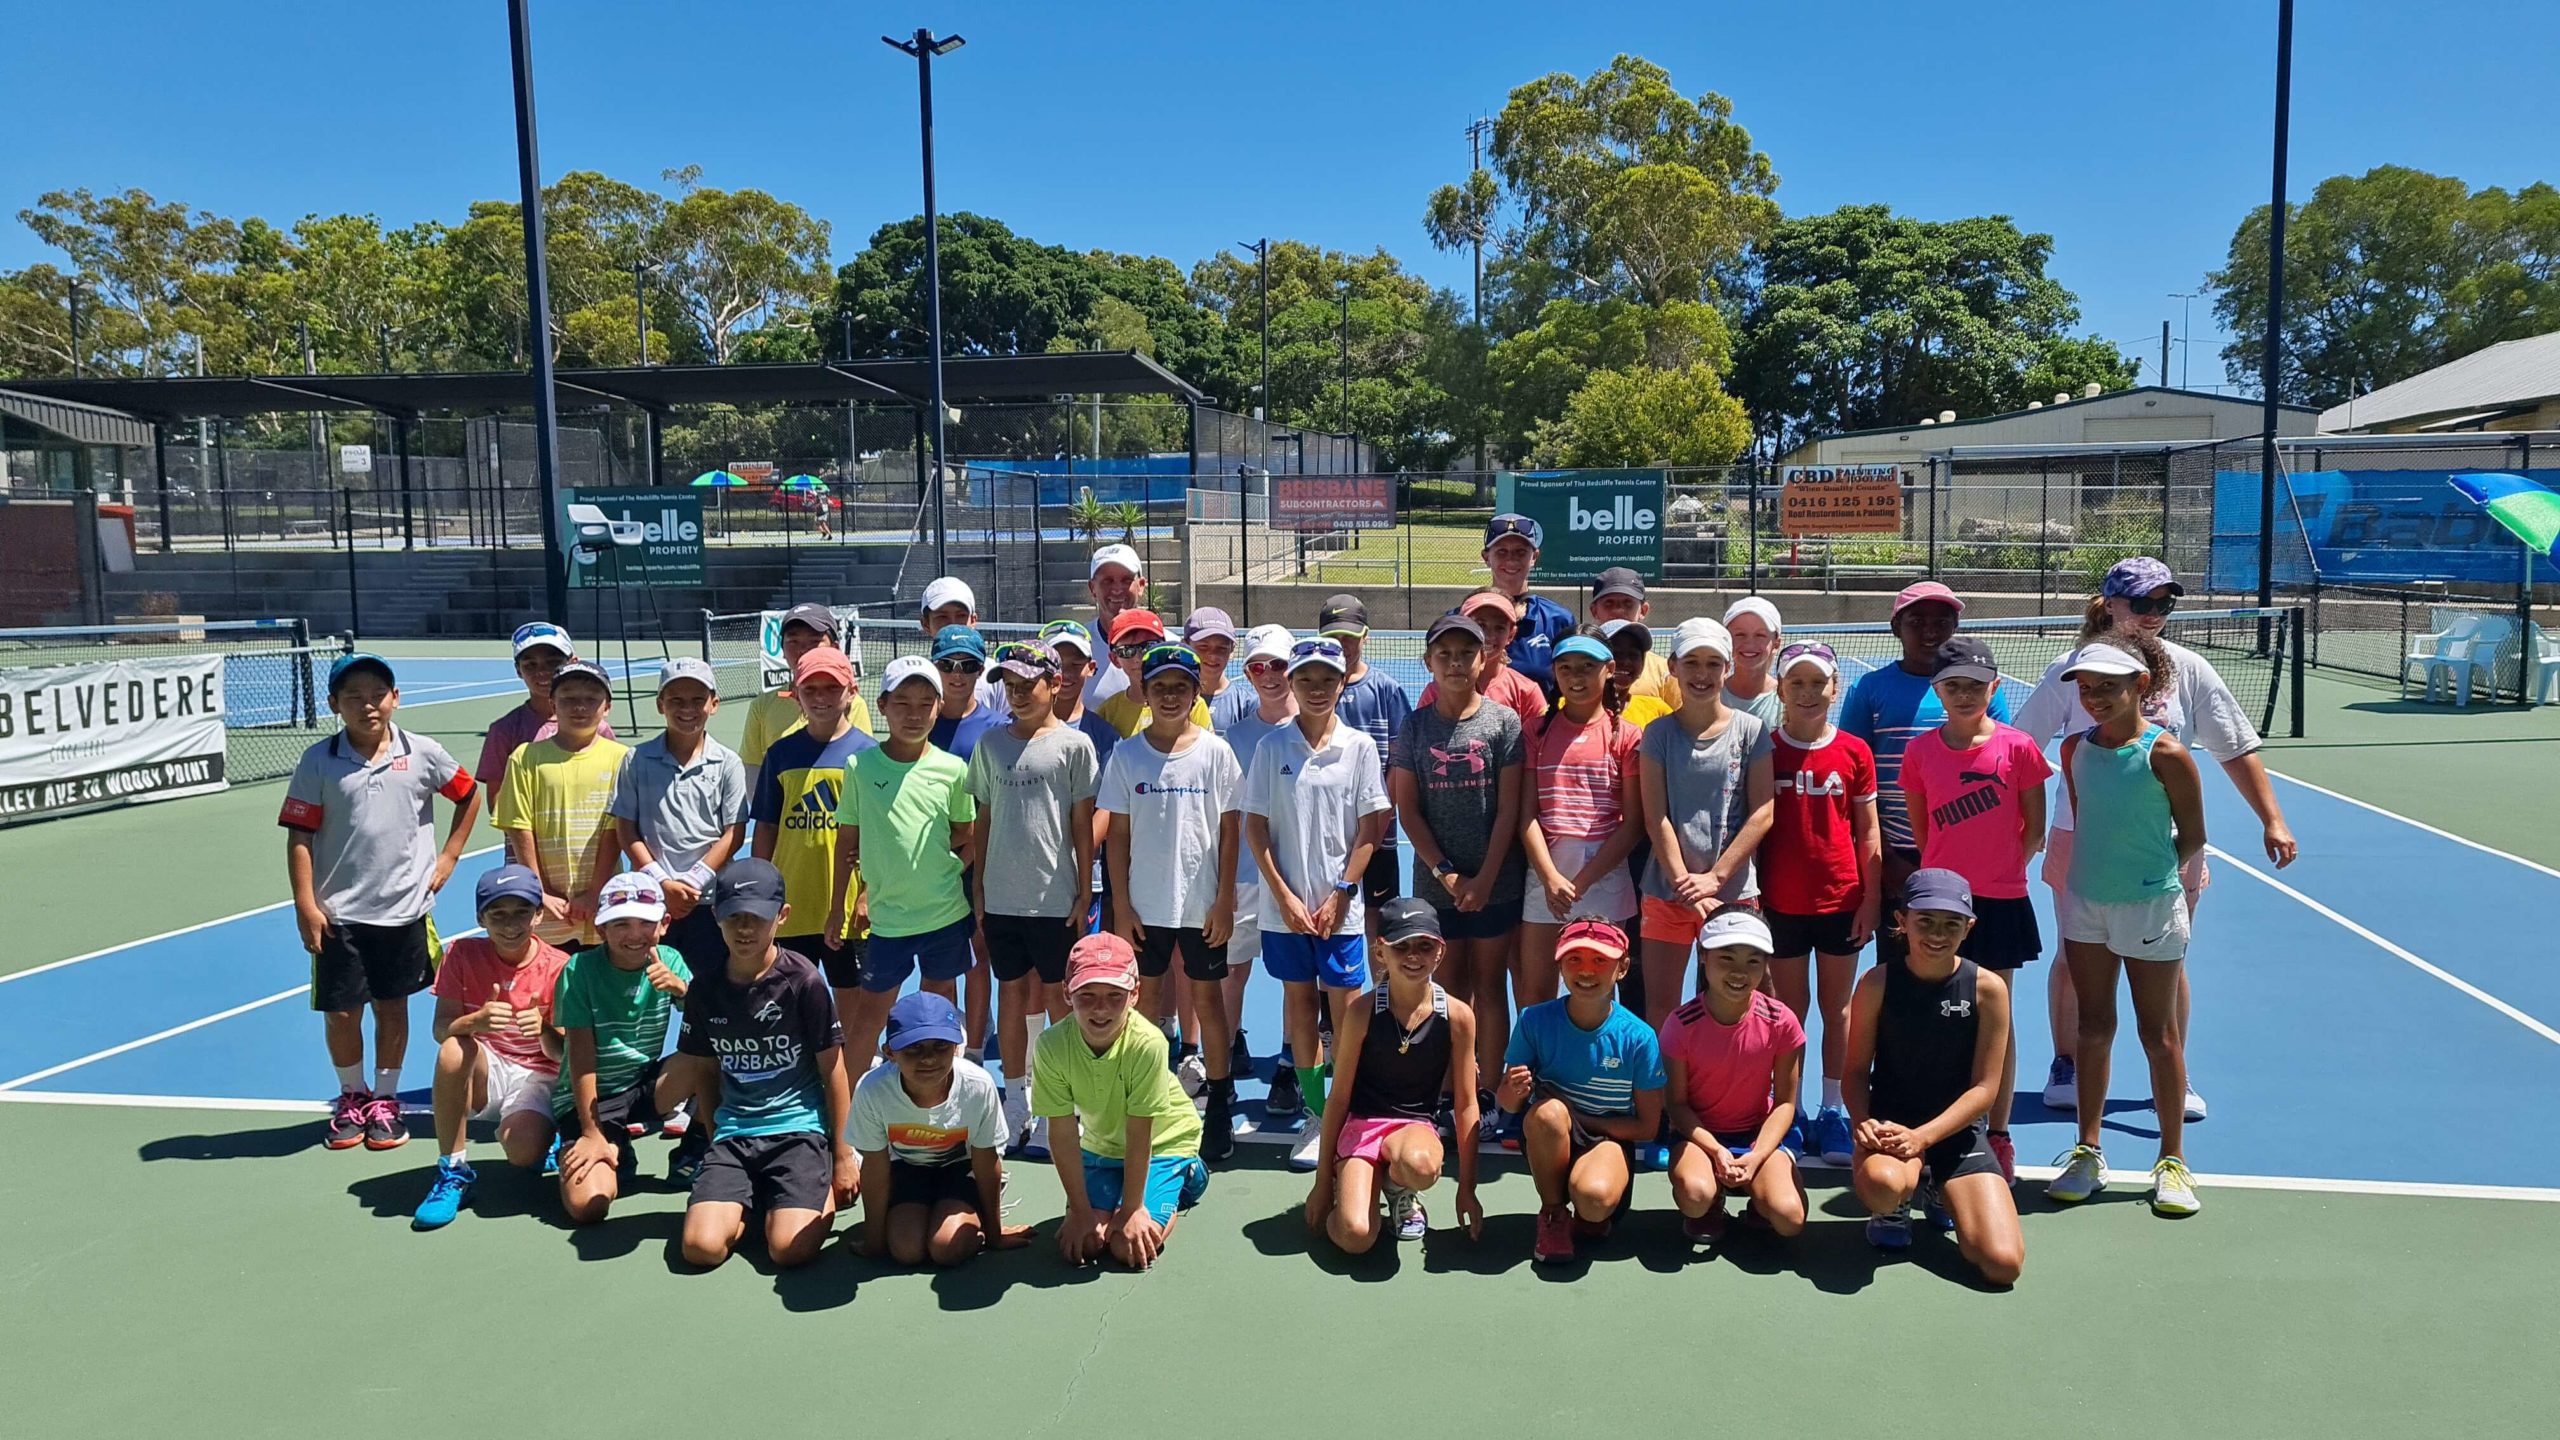 GRoup photo of kids attending the Focus Tennis Academy school holiday clinic